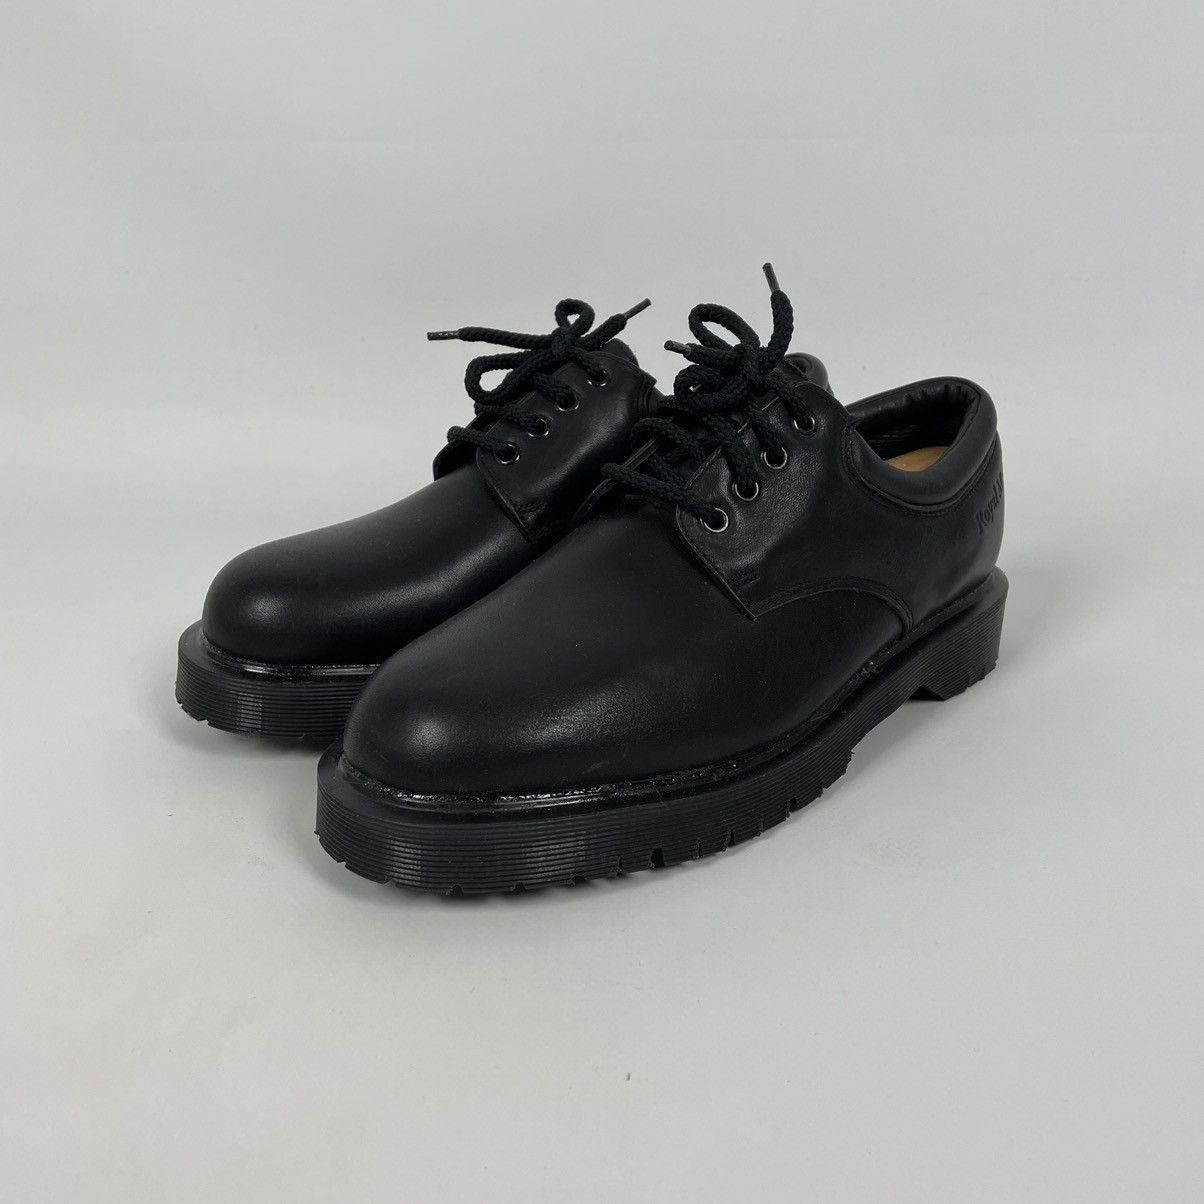 Dr. Martens Vintage Dr. Martens Royal Mail Shoes Made in England Size US 9 / EU 42 - 2 Preview